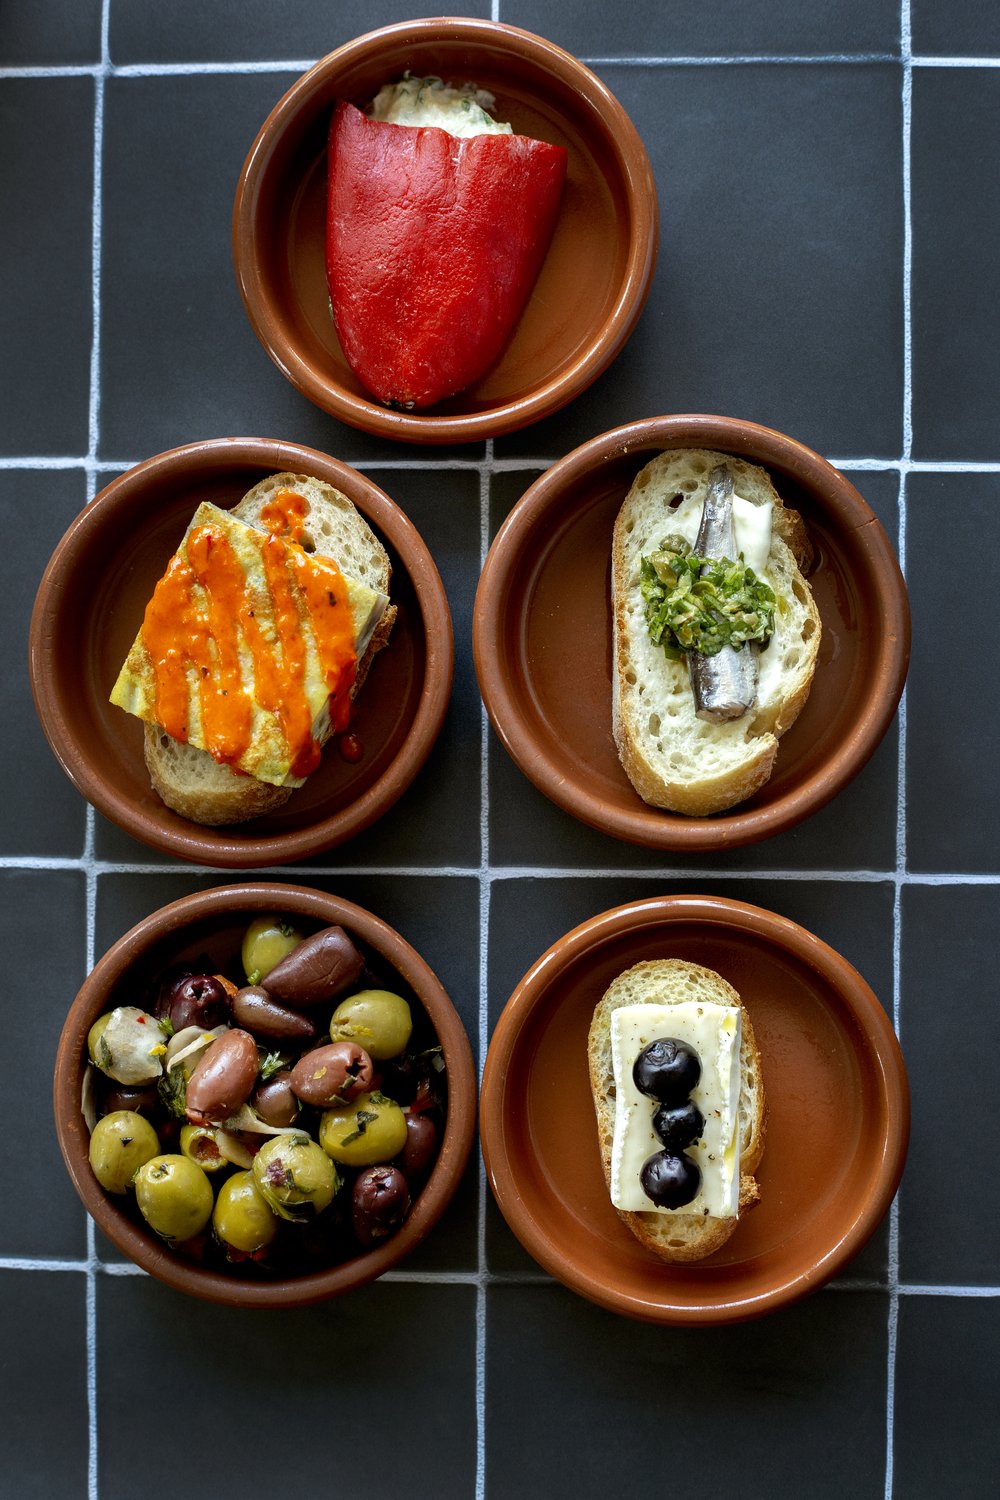 (Top to bottom) Stuffed piquillo pepper, Spanish tortilla with romesco sauce, sardine on toast, marinated olives, and brie with pickled blueberry at Txikiteo